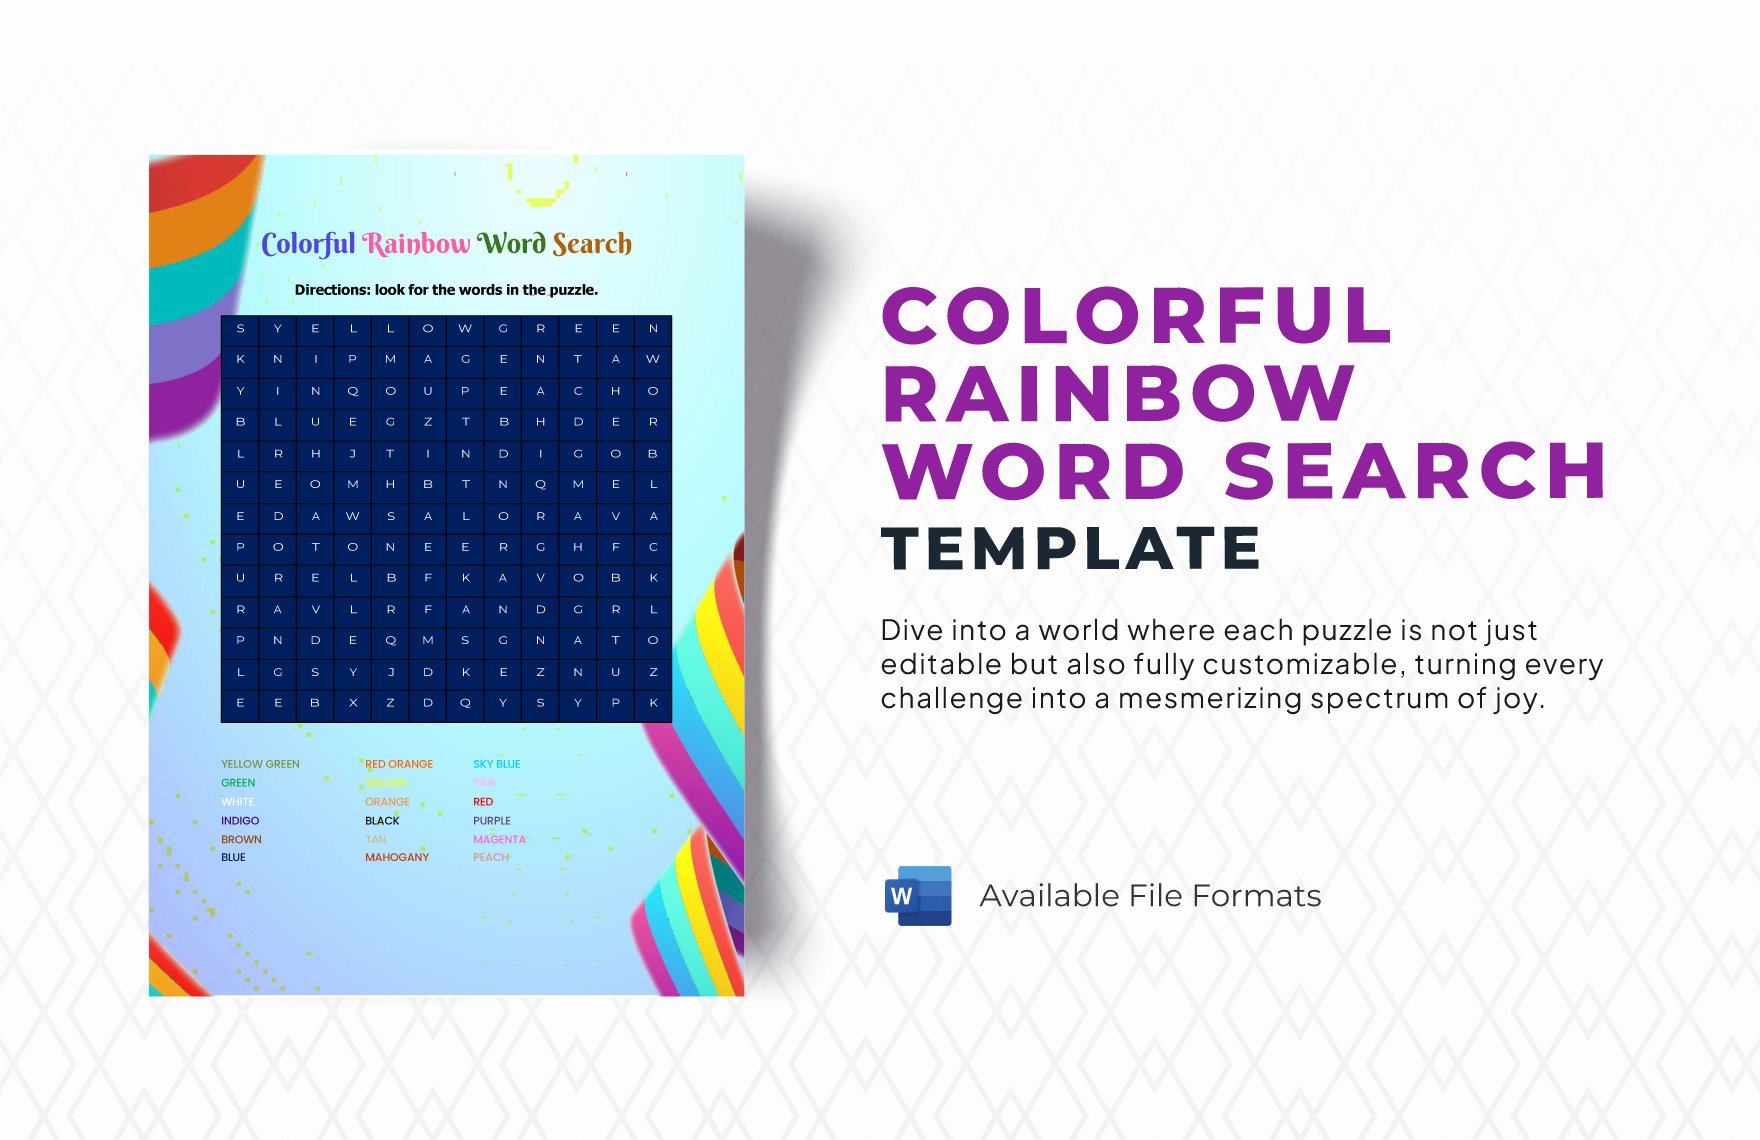 Colorful Rainbow Word Search Template